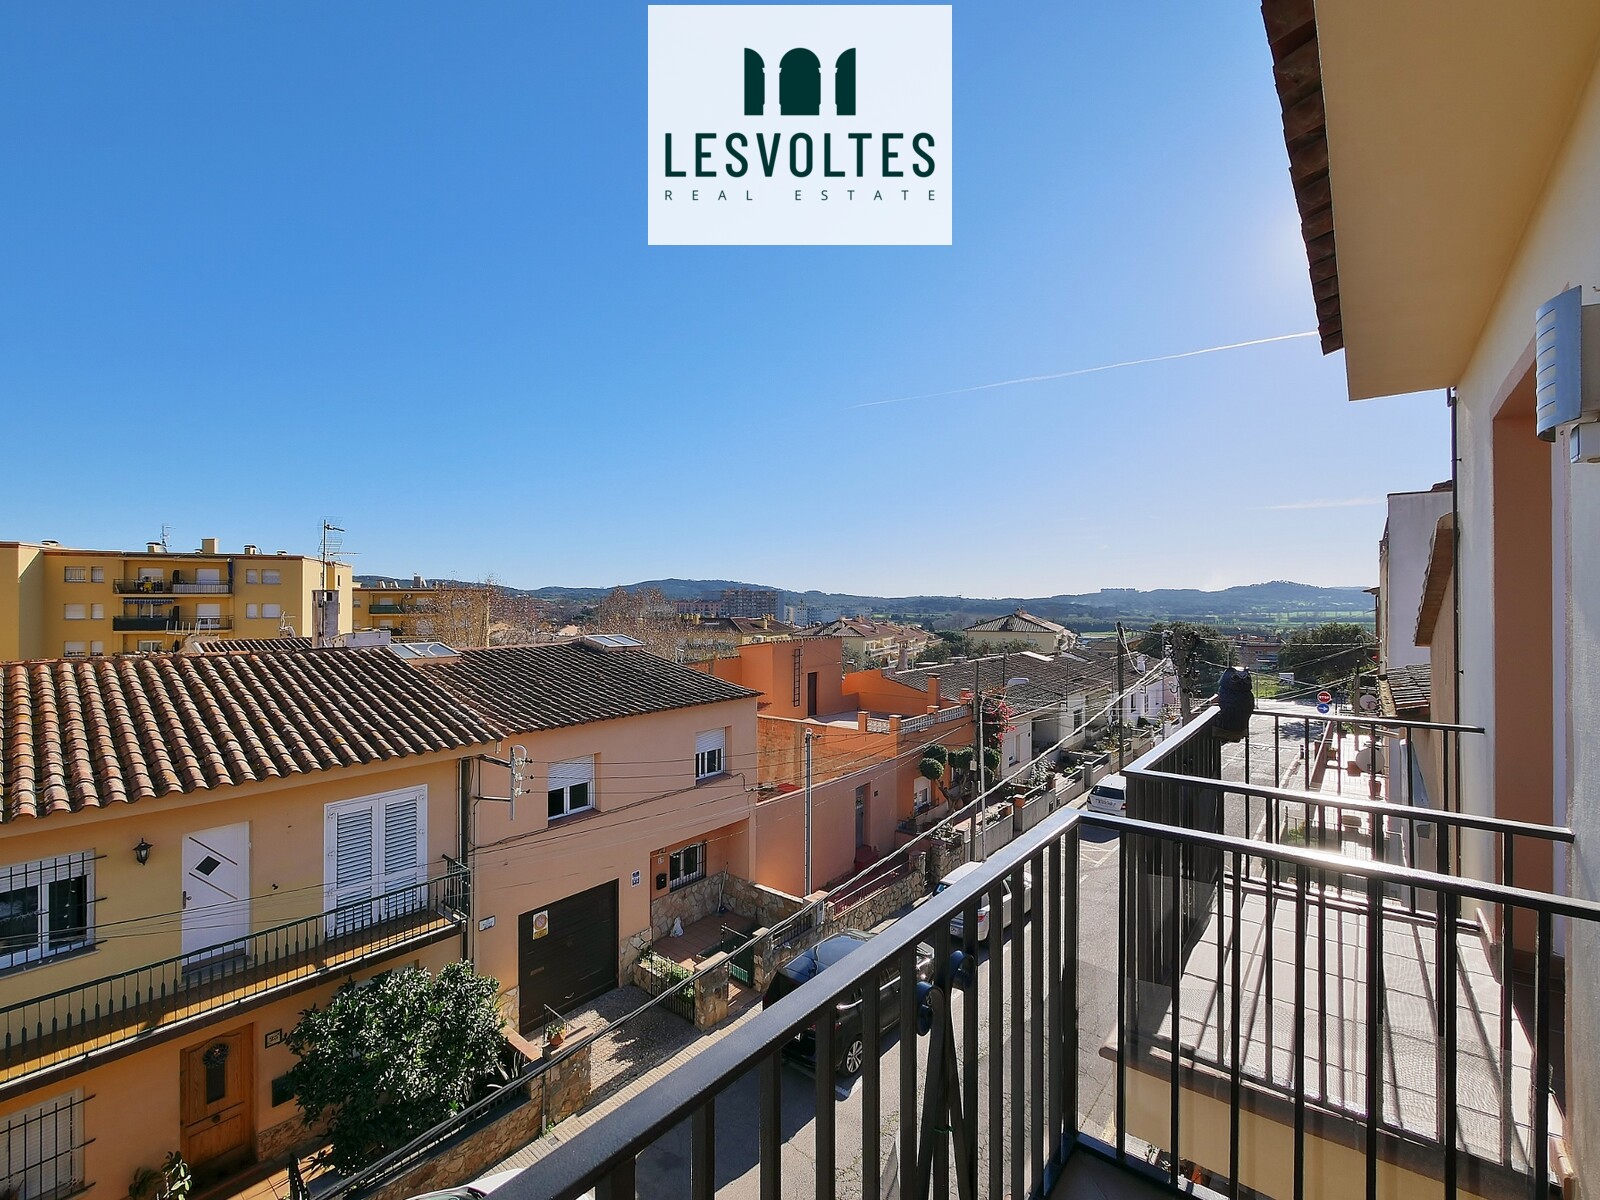 3 BEDROOM FLAT, SPACIOUS AND BRIGHT IN PALAFRUGELL. PARKING SPACE INCLUDED.